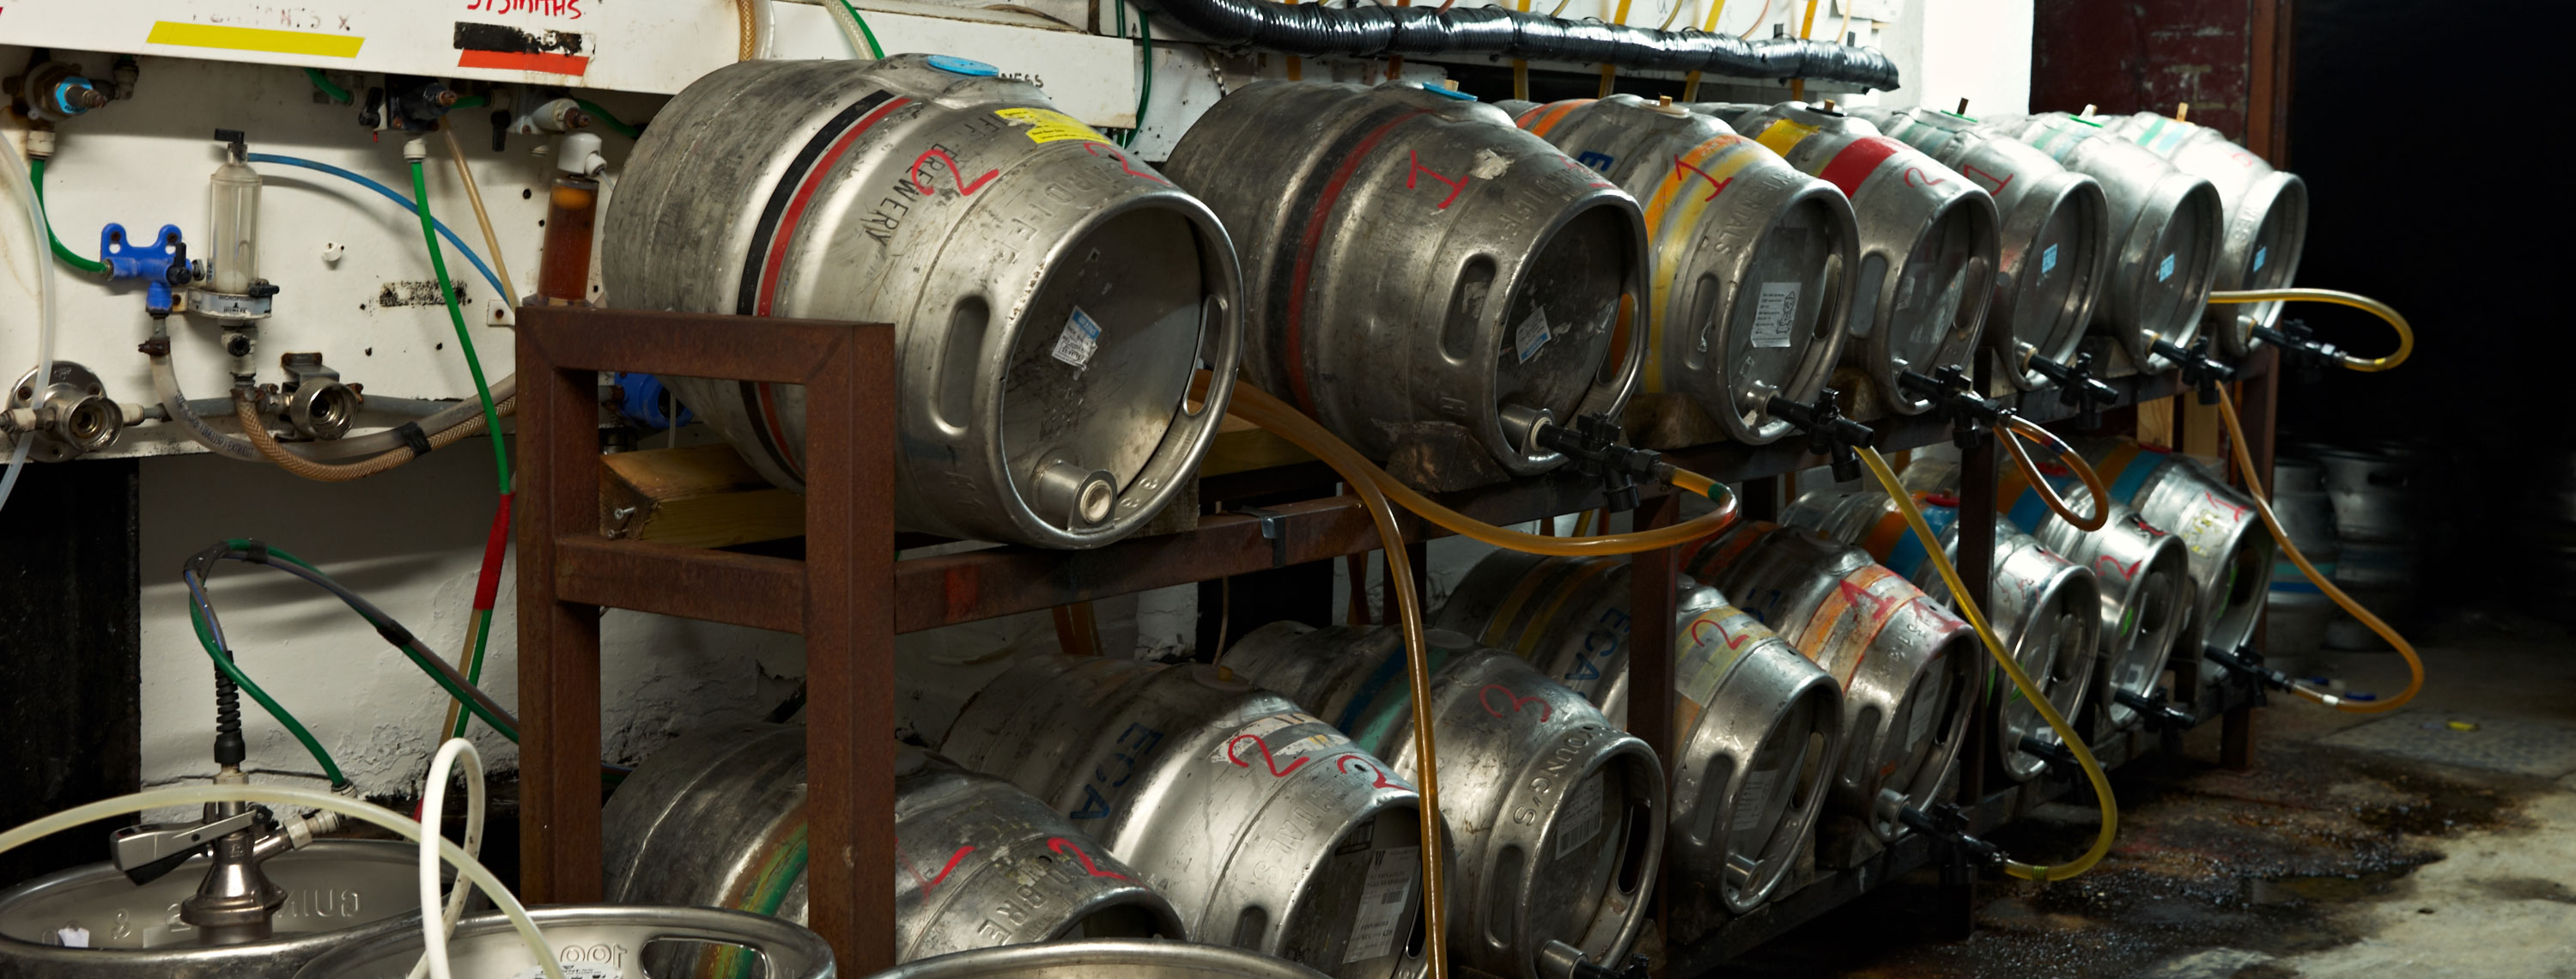 Rows of beer kegs stored in the back of a pub